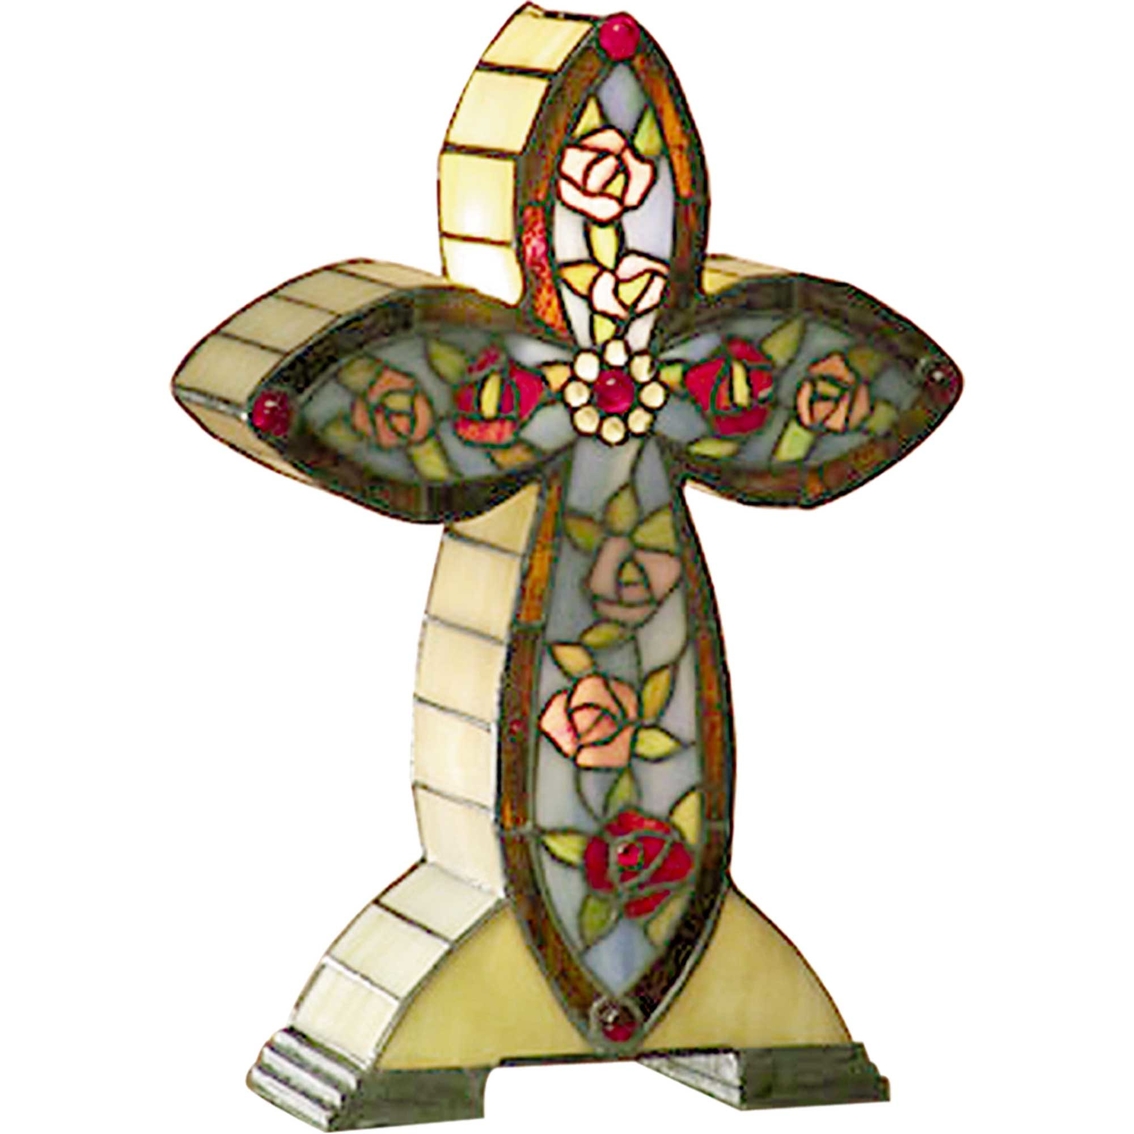 Dale Tiffany Flaura Cross Accent Lamp - Image 1 of 2